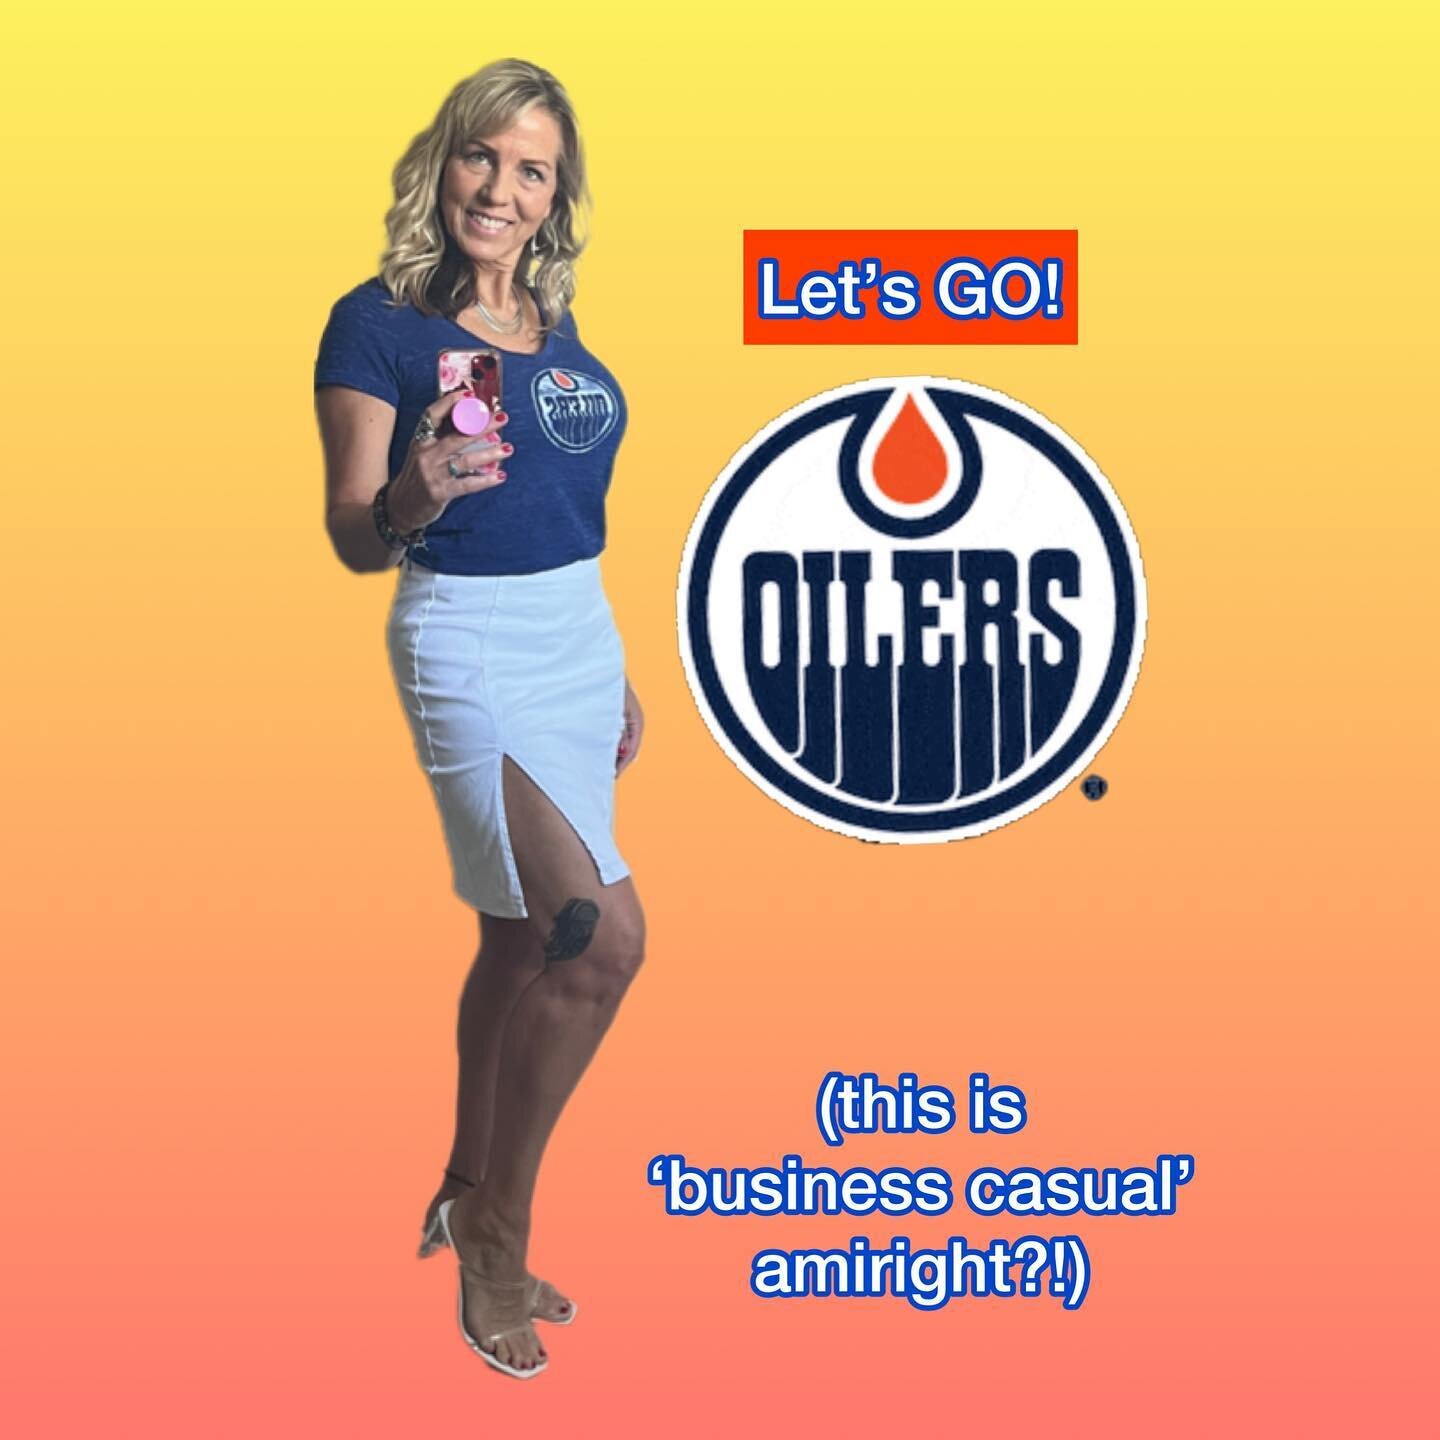 🙌🏻 you know you&rsquo;re in Oil Country when this is &lsquo;business casual&rsquo;!! And your team is in the playoffs!!
AGAIN!

(Sorry not Sorry Flamers 🔥 ..again😆)
.
.
#edmonton #edmontonalberta #edmontonoilers #edmontonoilershockey #edmontonoil